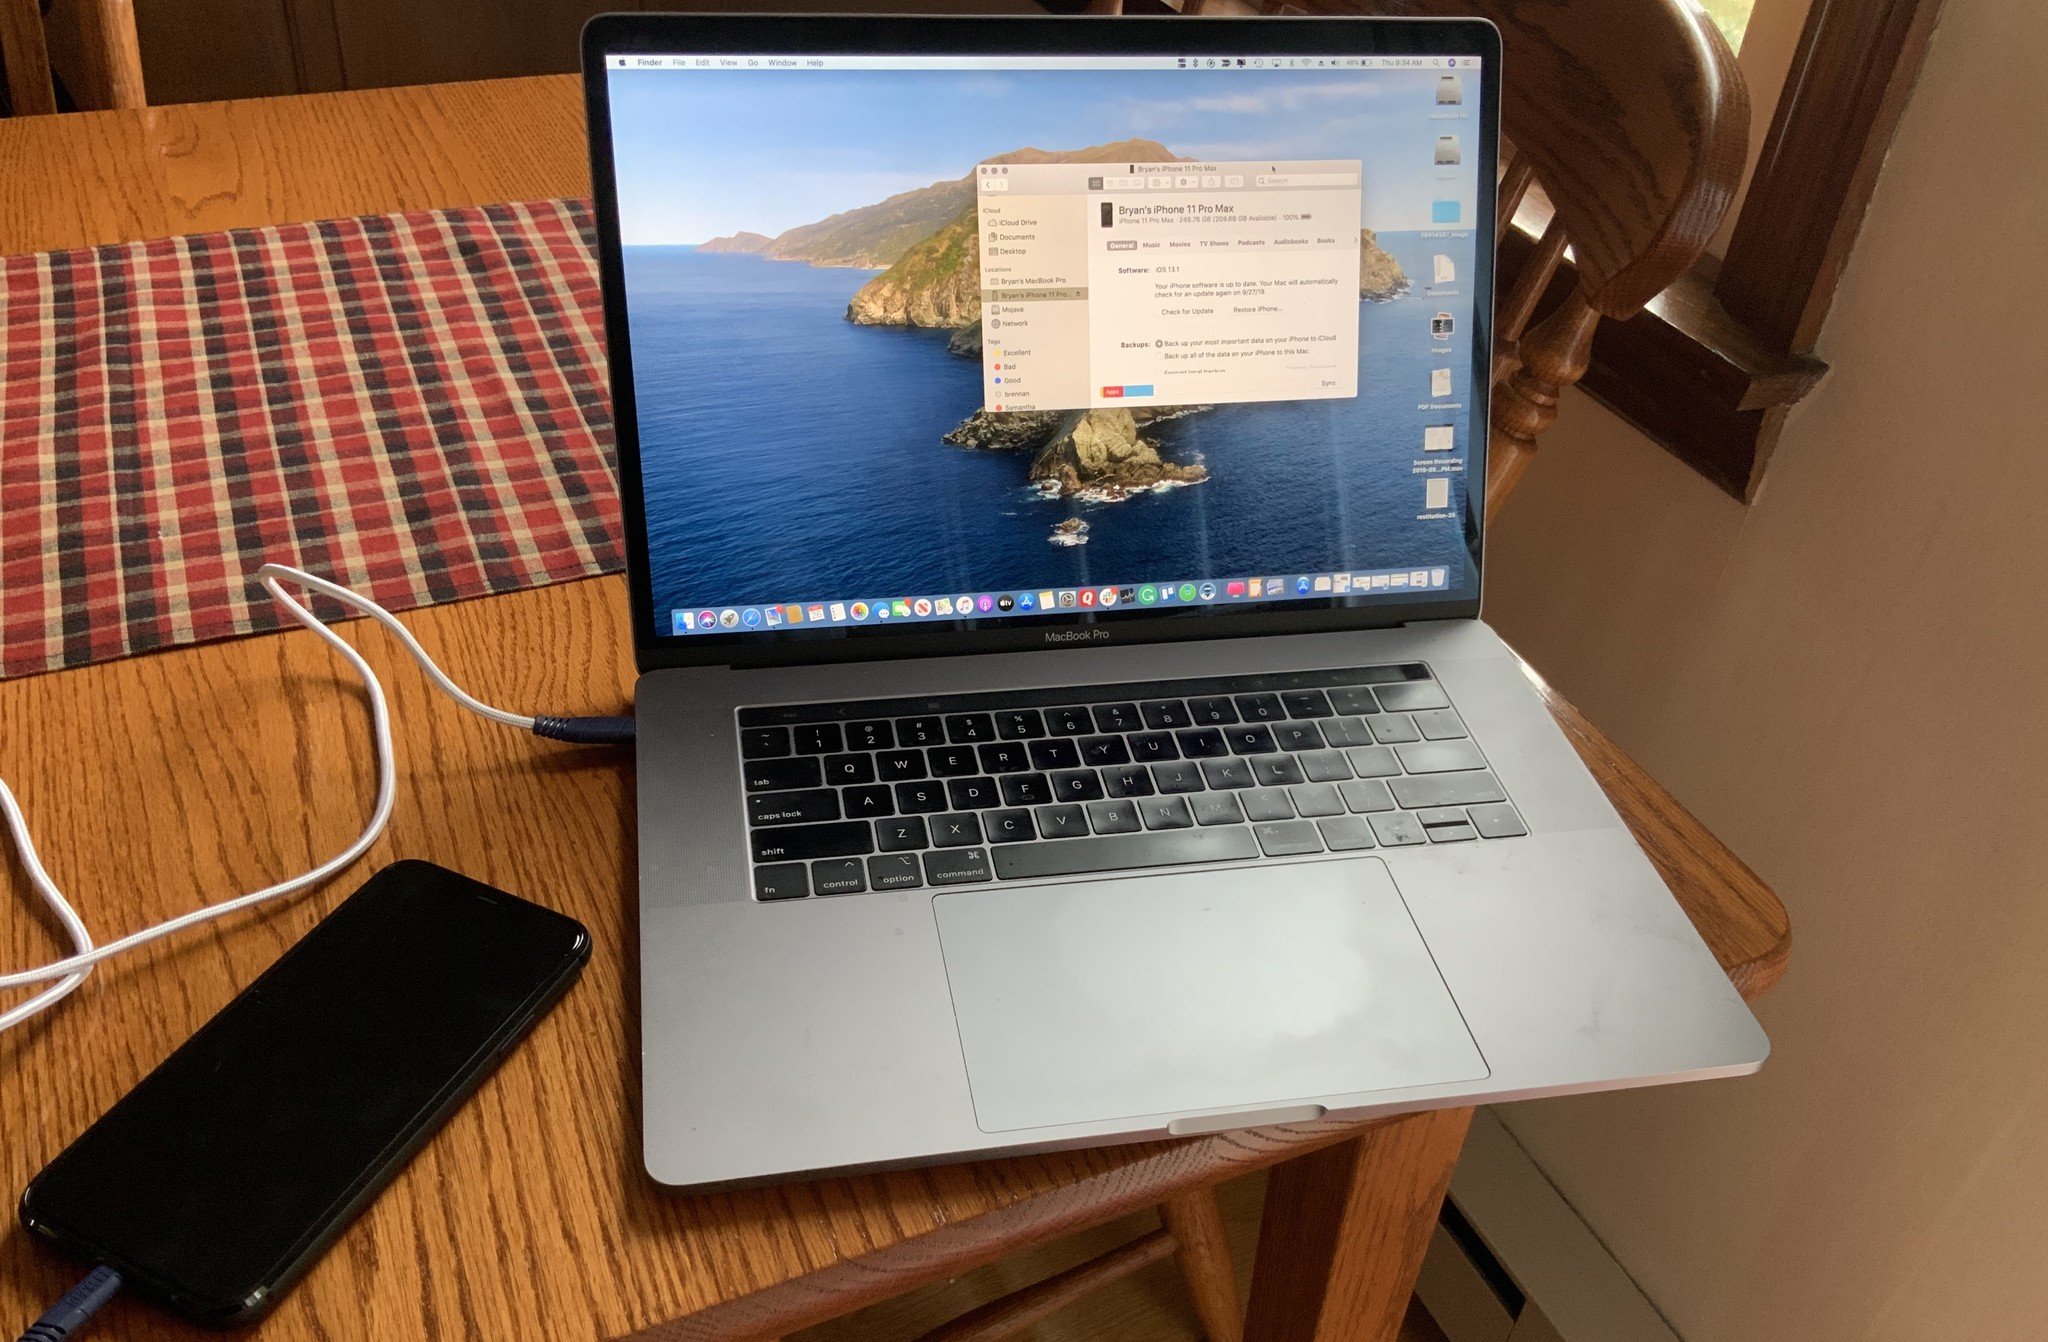 syncing apple phone to macbook pro